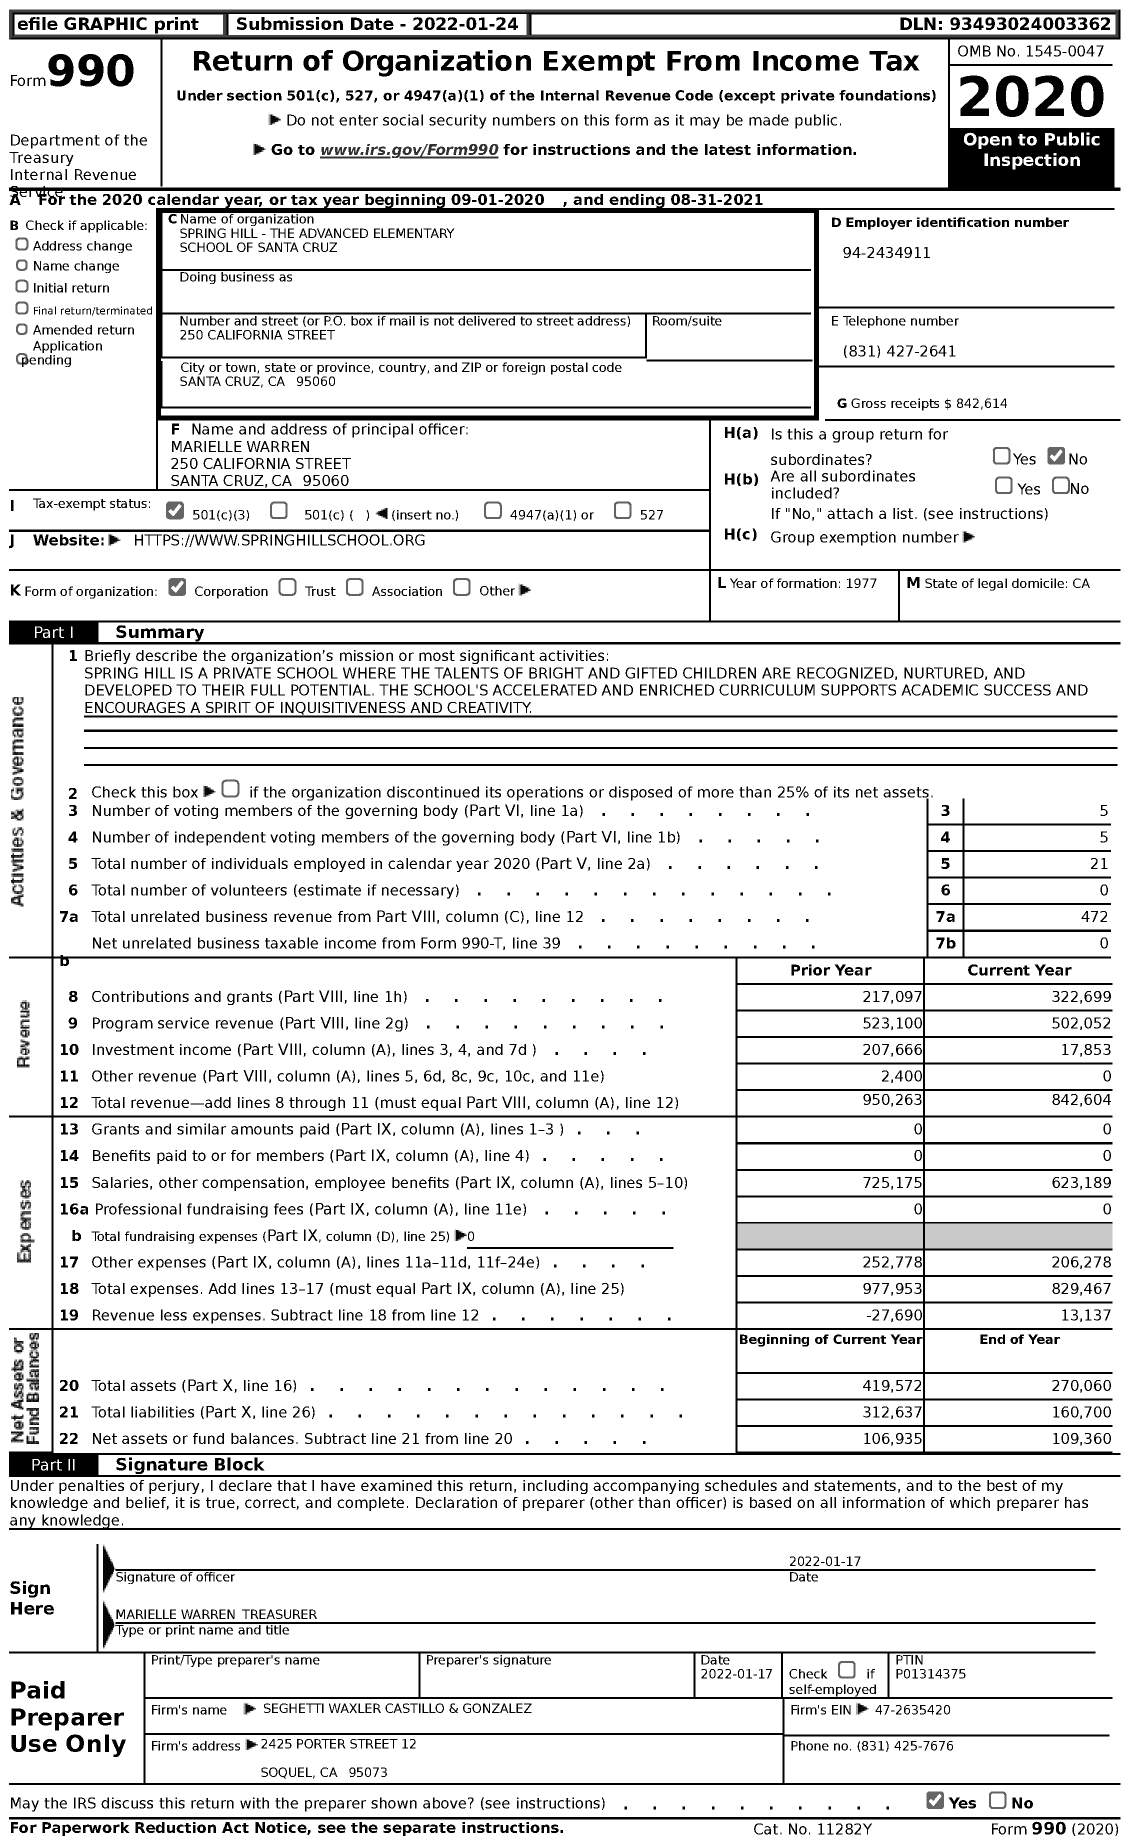 Image of first page of 2020 Form 990 for Spring Hill - The Advanced Elementary School of Santa Cruz